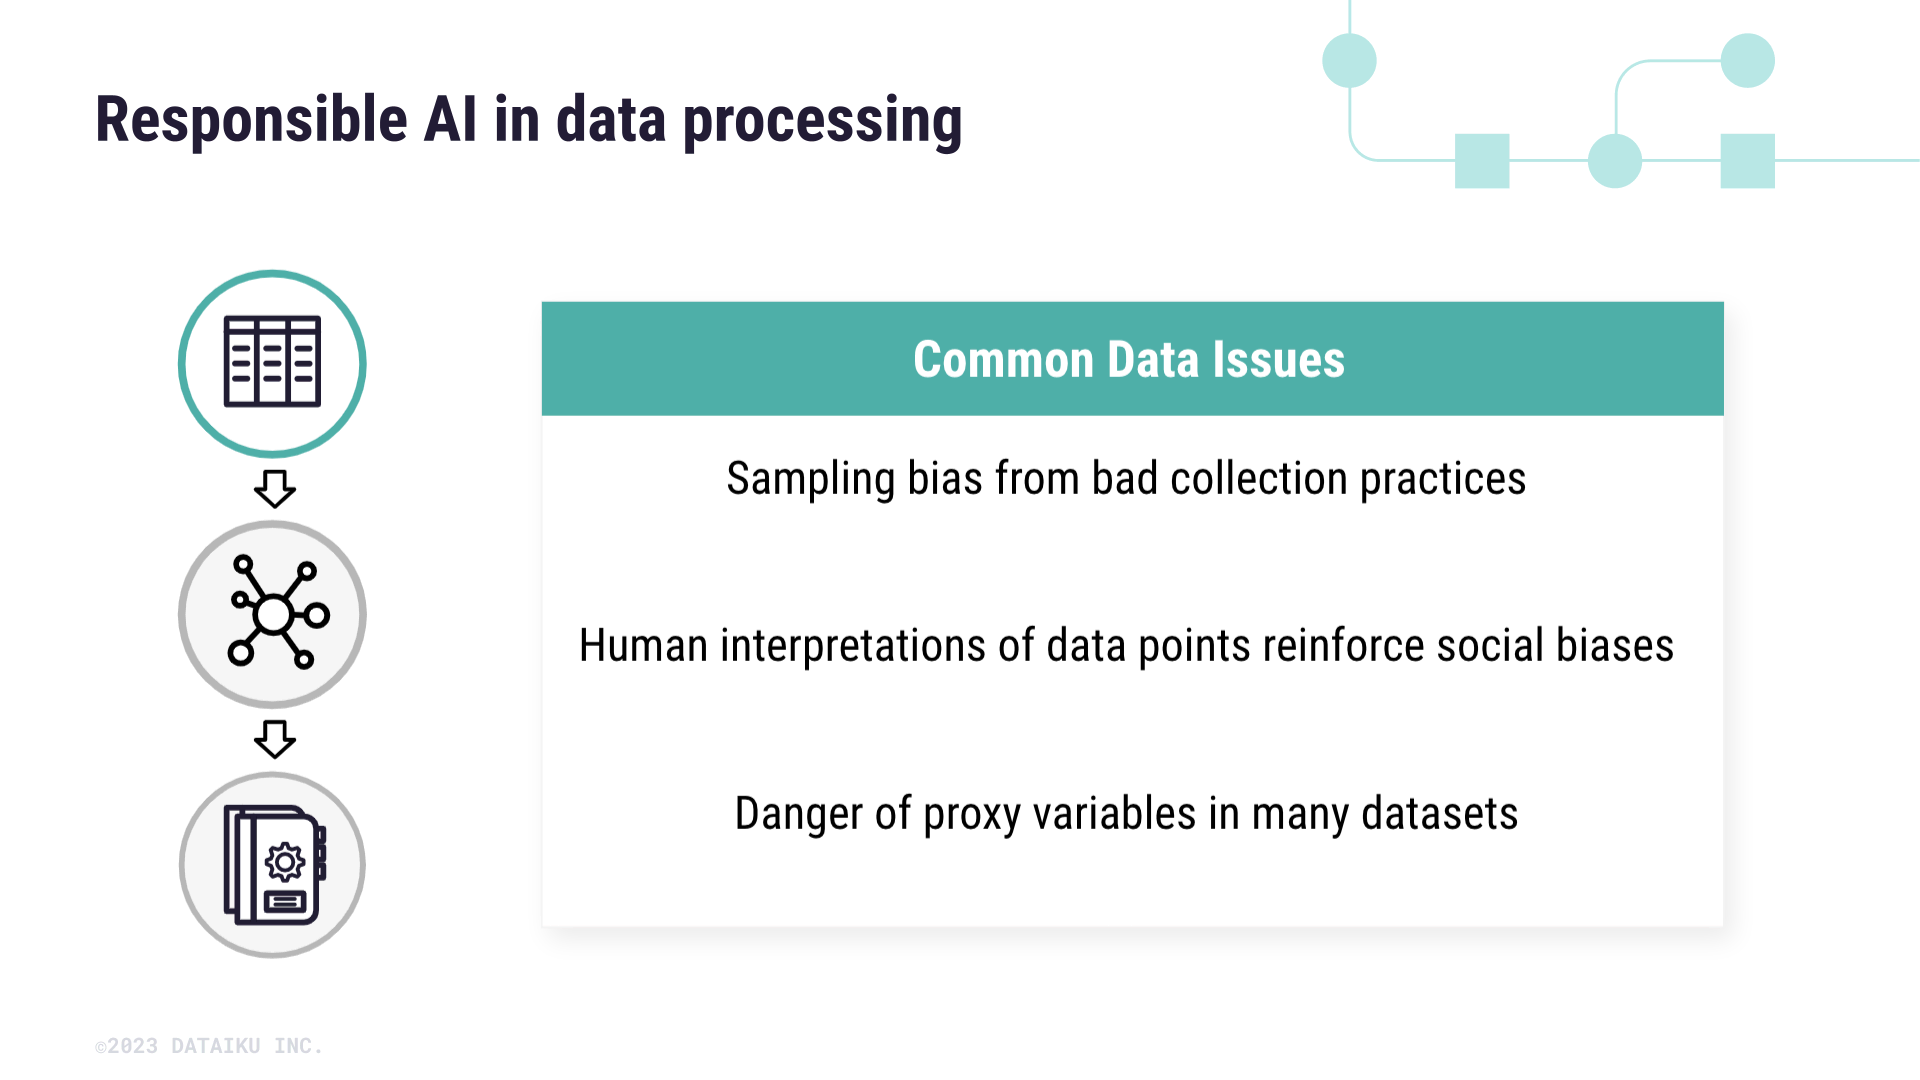 Common issues in the data processing stage: sampling bias, social biases, and proxy variables.